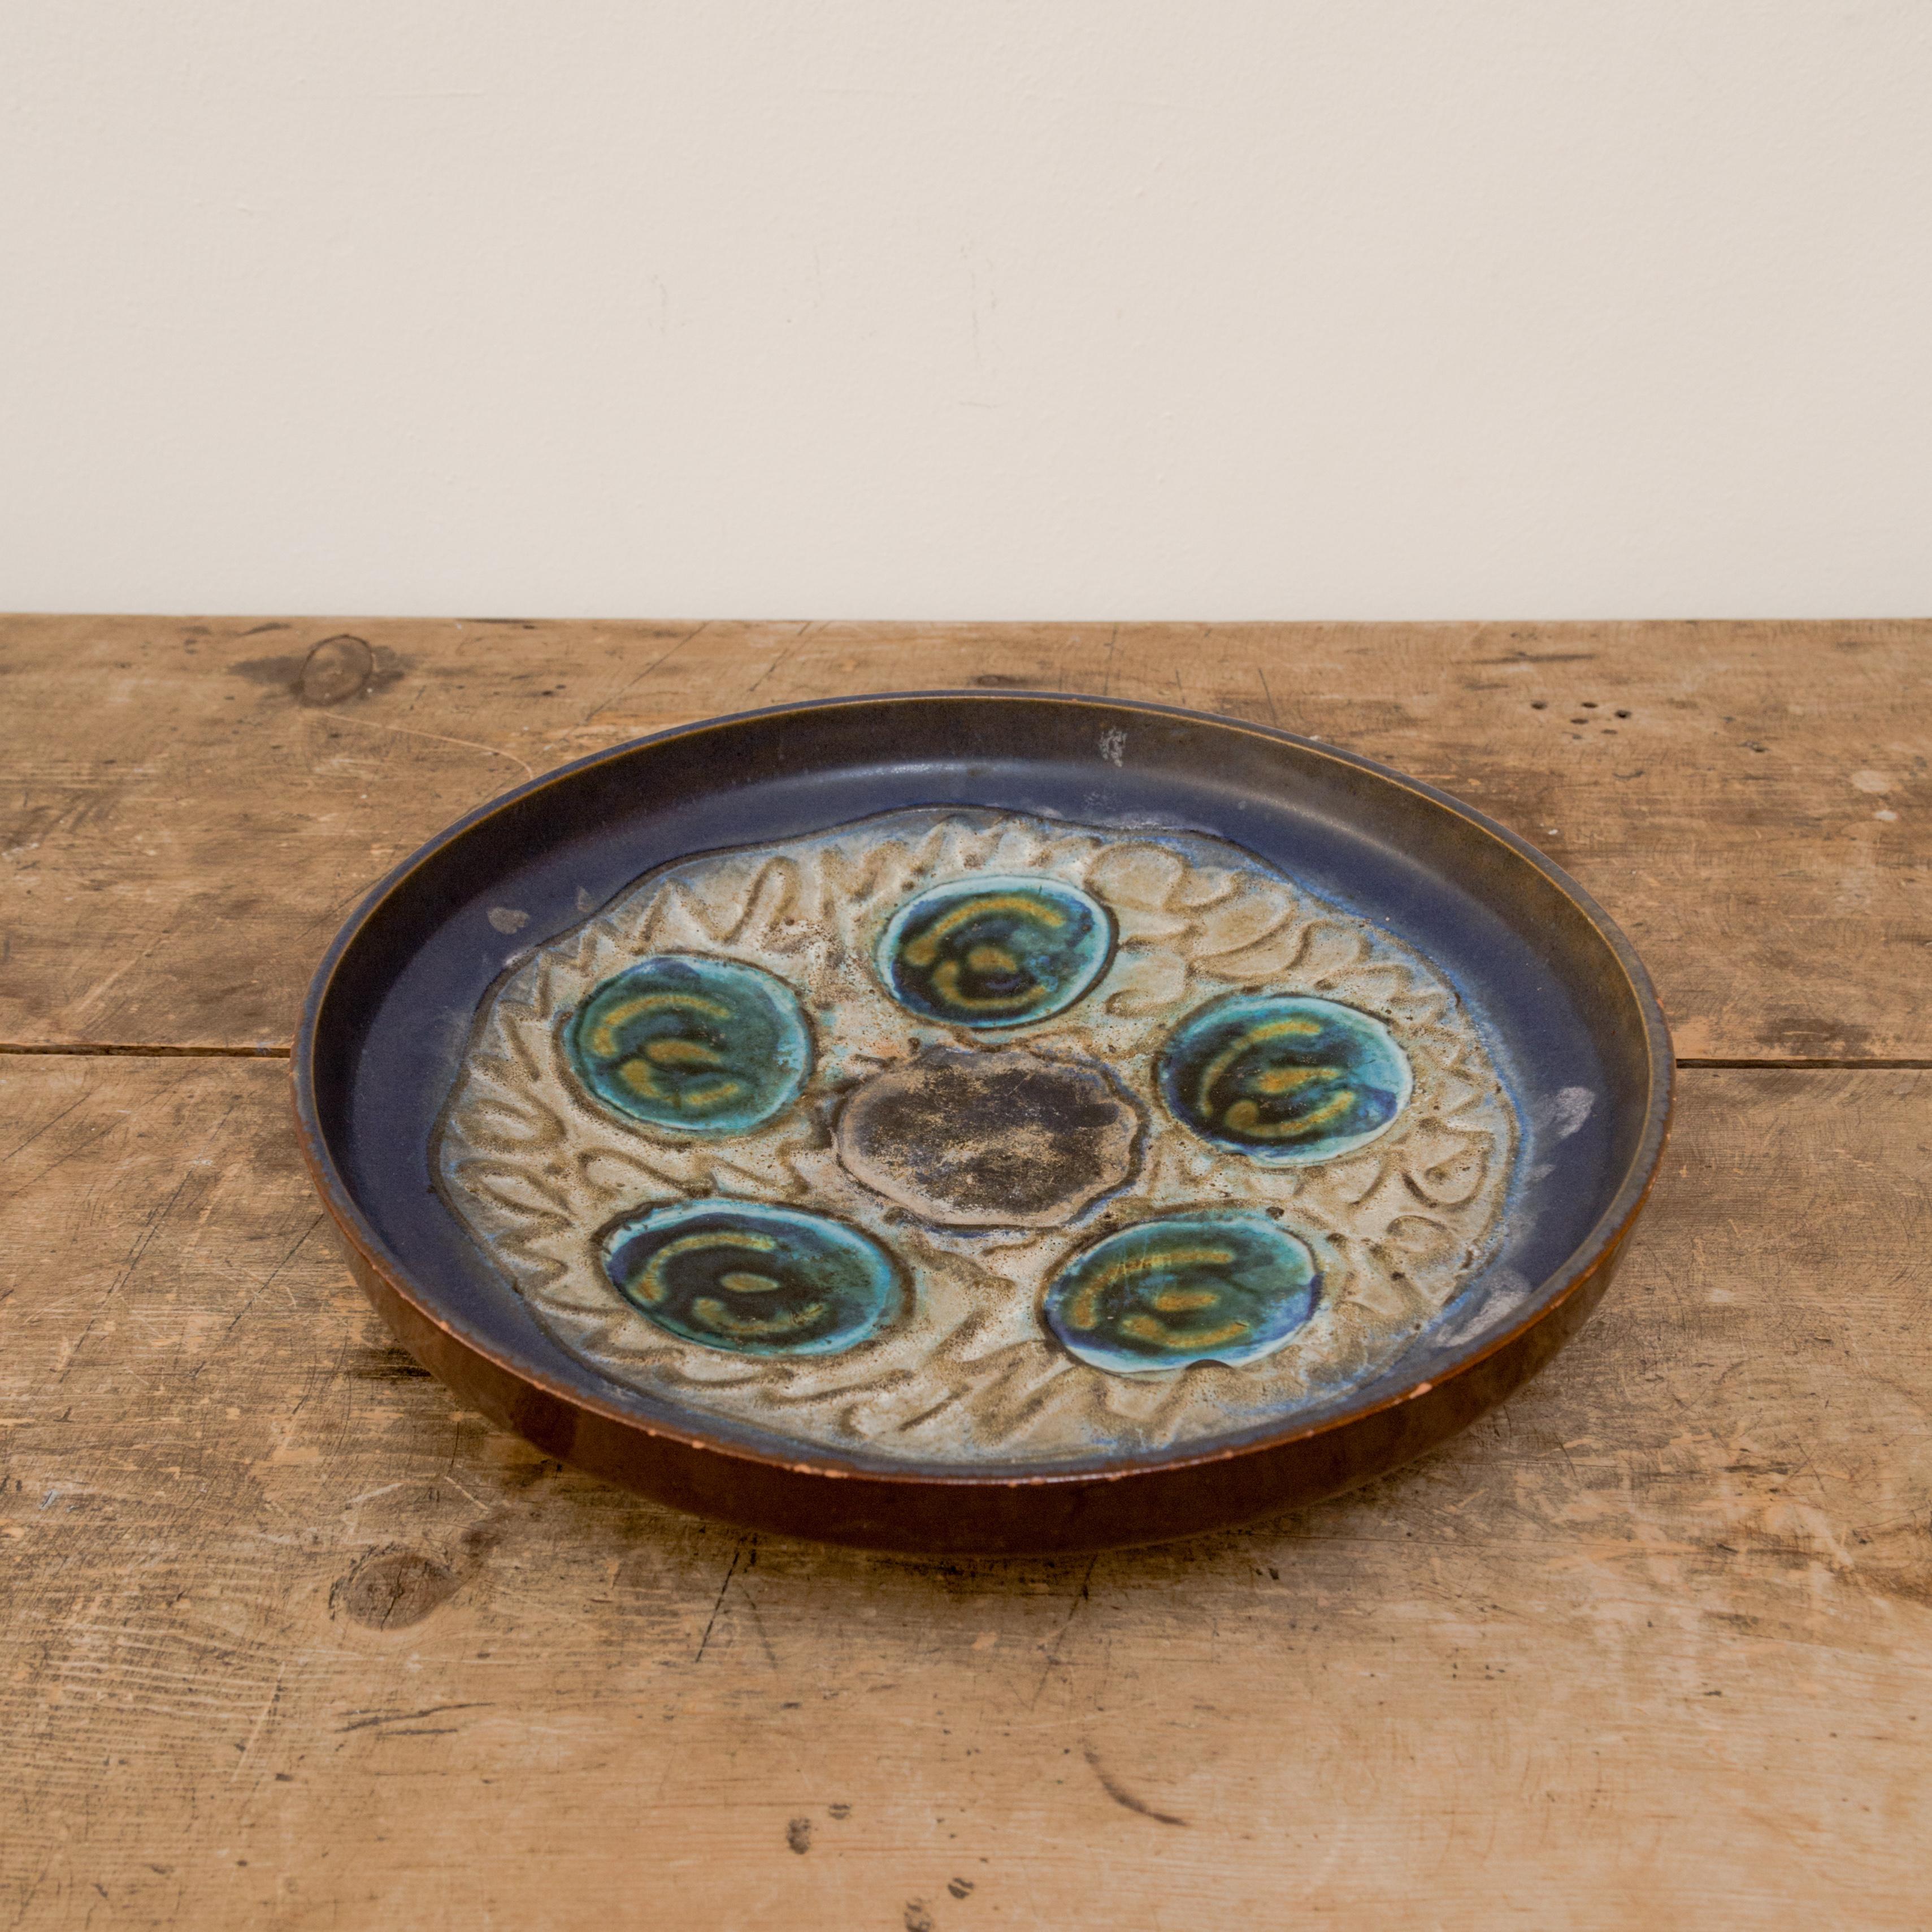 Cold war era, West German earthenware platter with scofridio incised design and varying shades of blue and natural glaze, Germany circa 1960's.